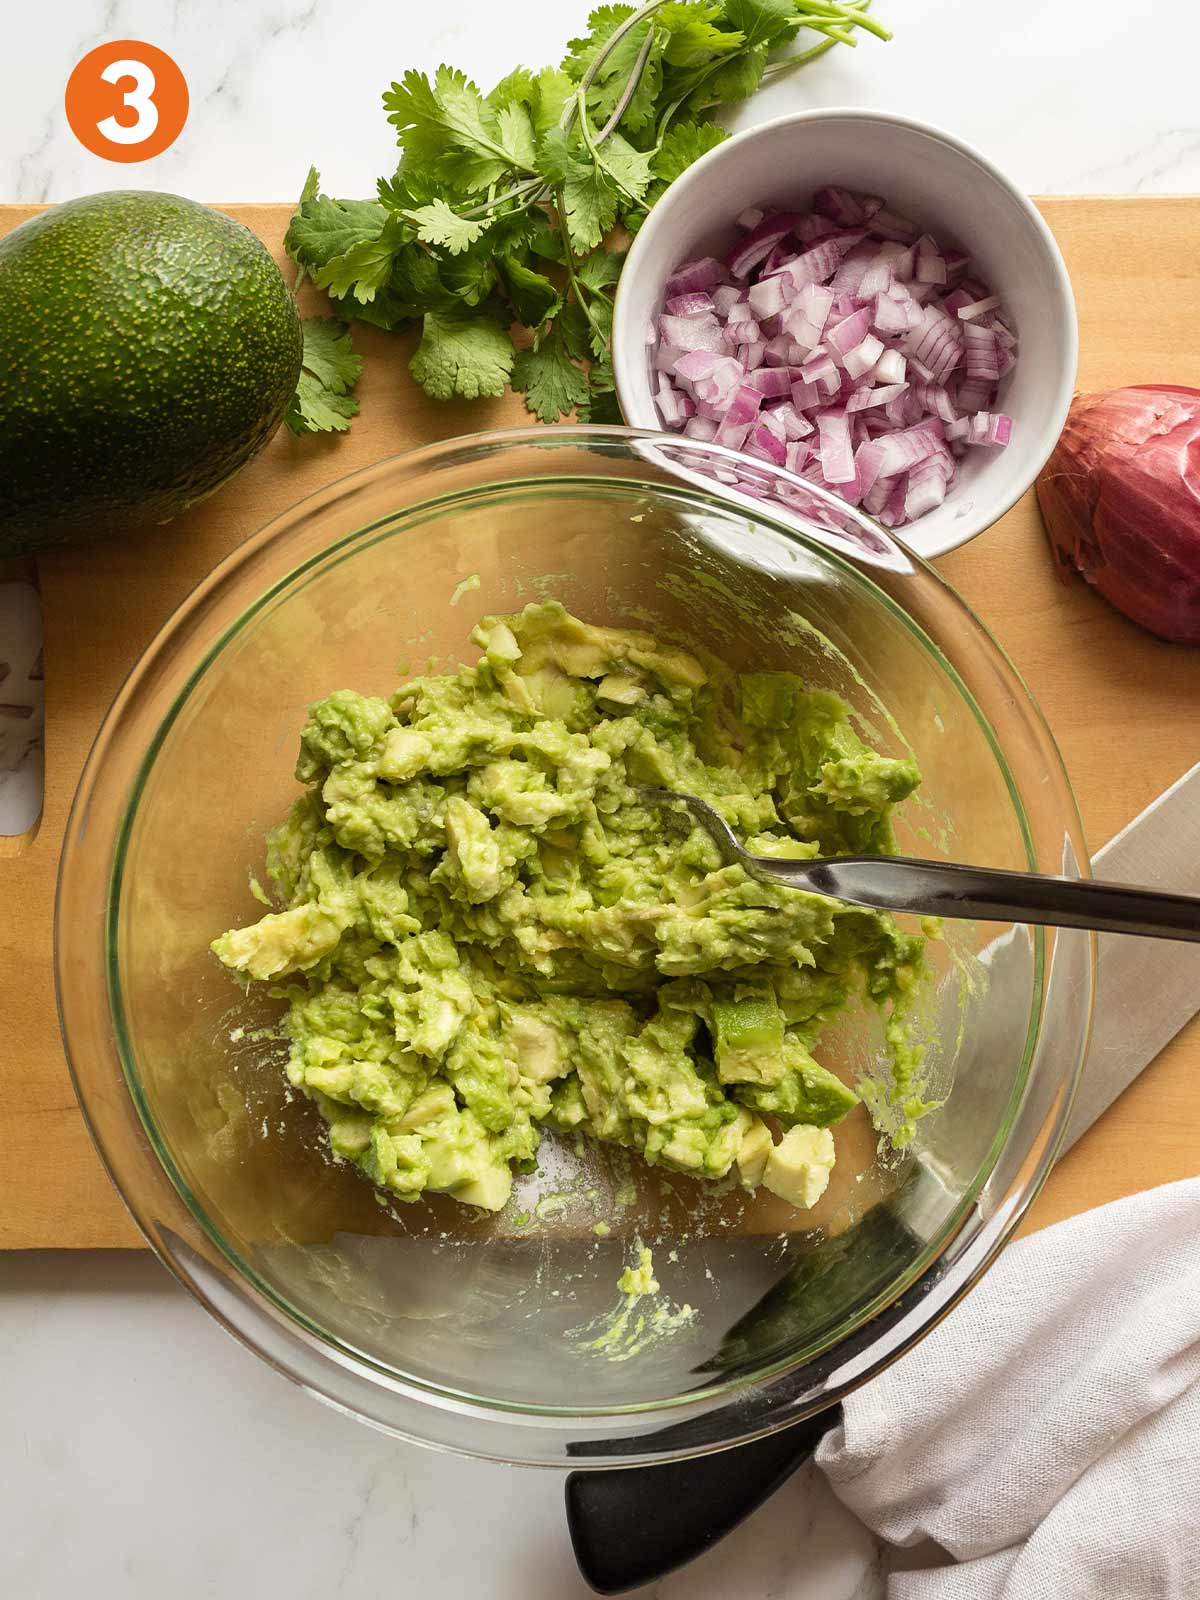 Avocado to make 4-ingredient guacamole in a bowl.